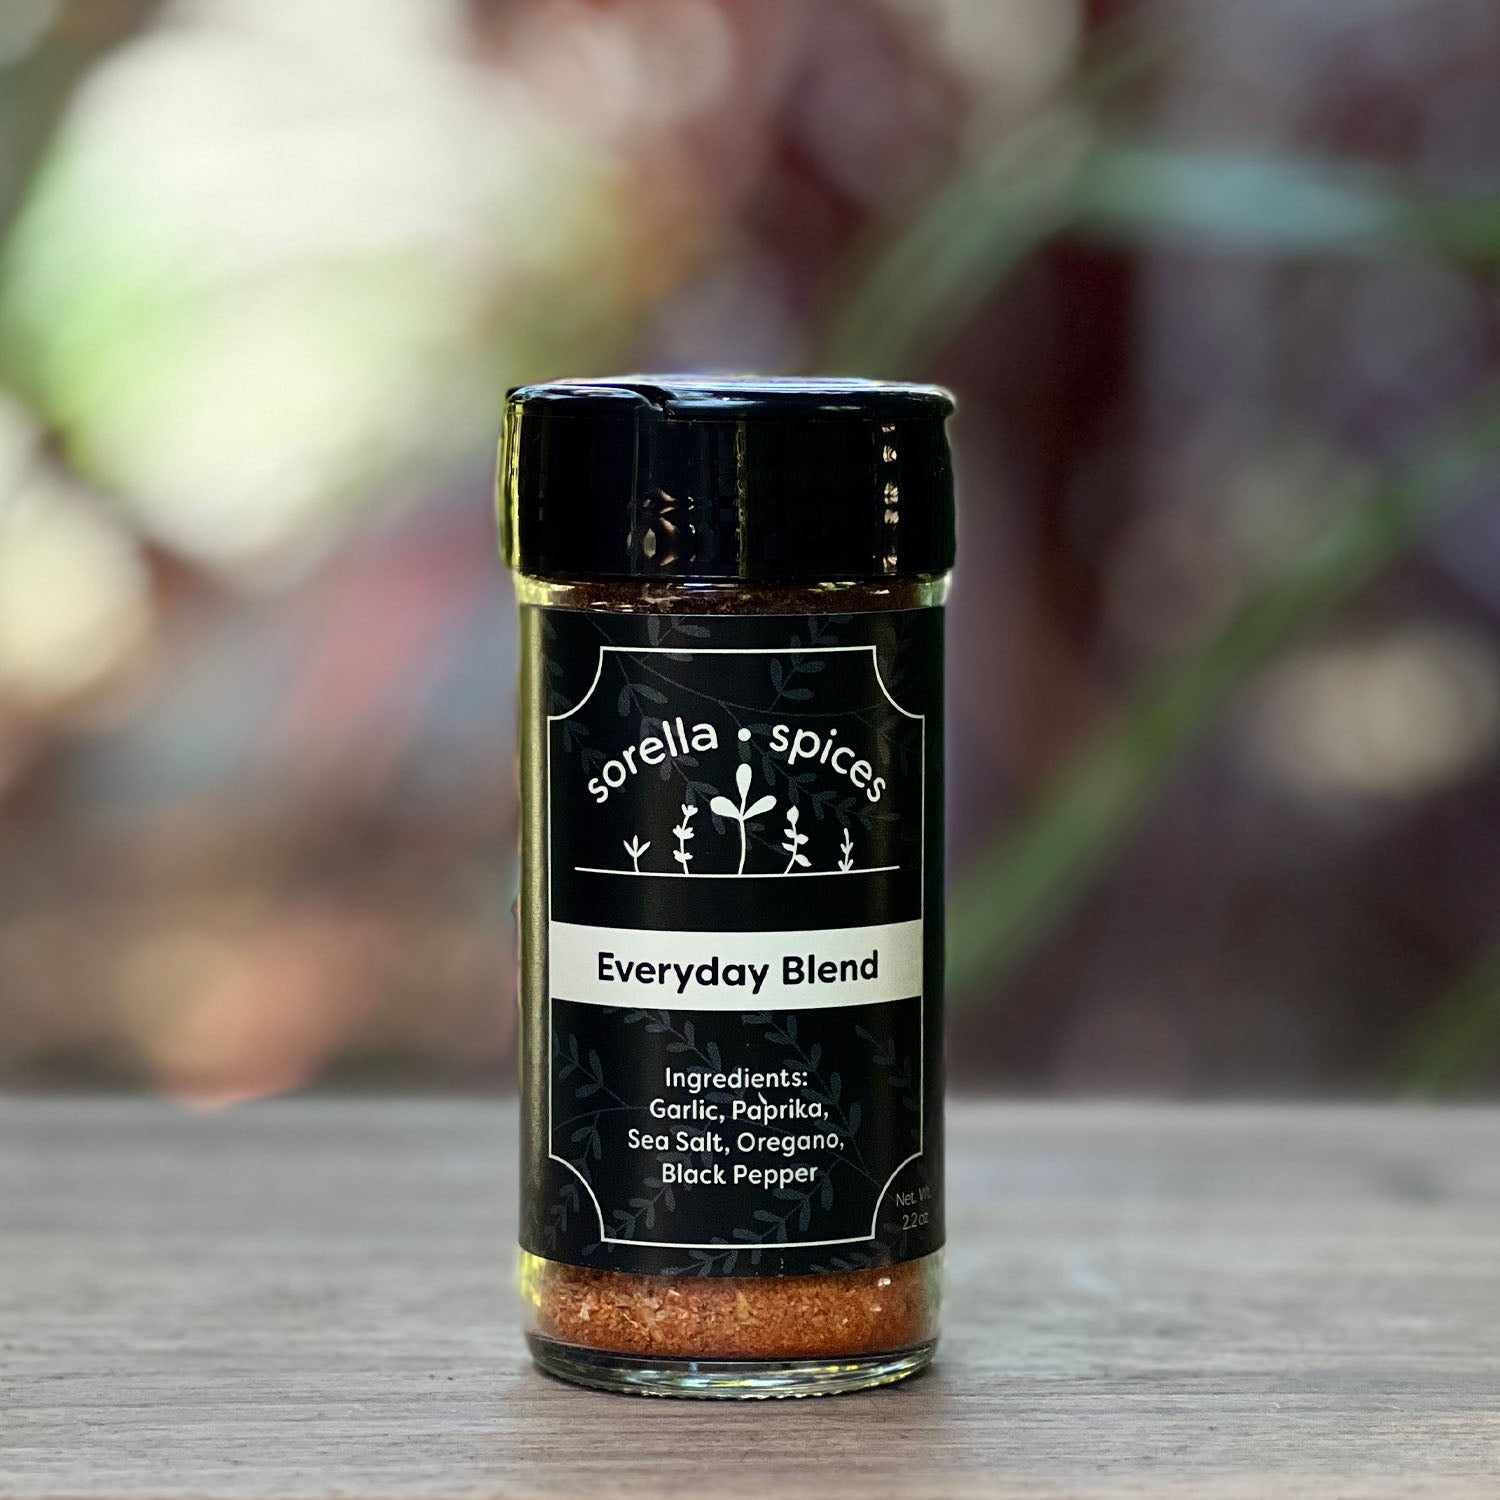 Sorella Spices Everyday Blend, you can use this blend everyday in just about anything